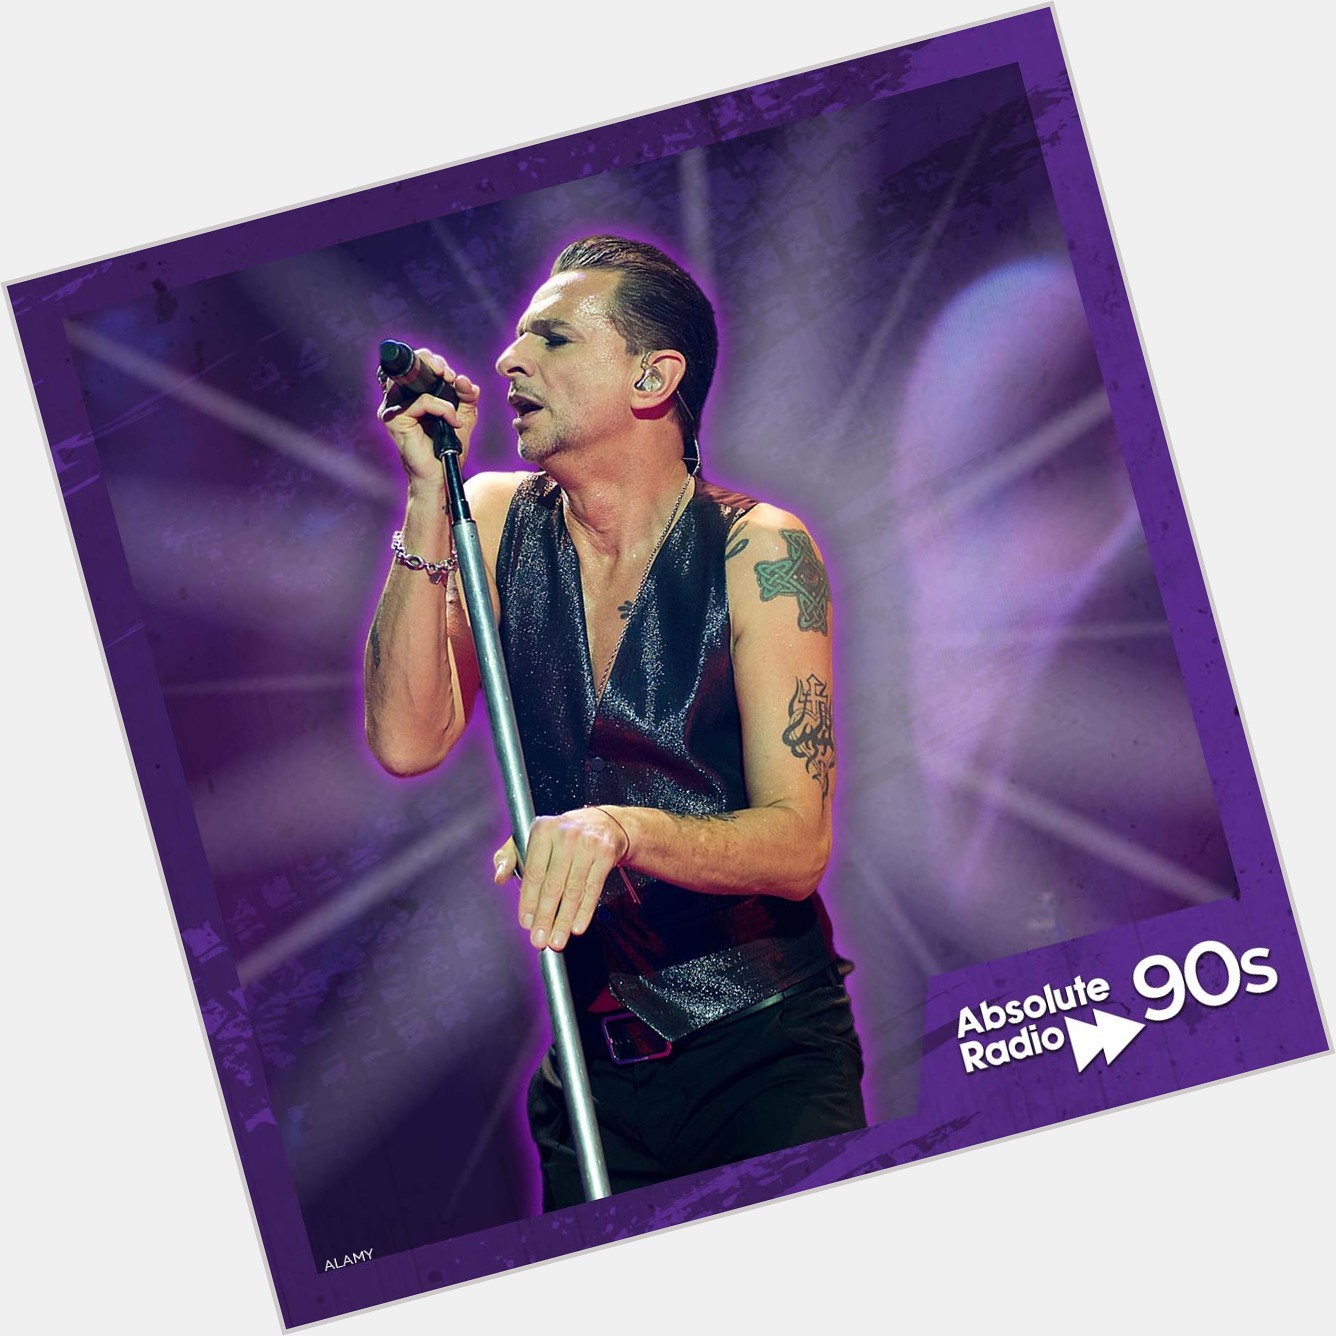 Wishing a happy birthday to frontman, Dave Gahan (  